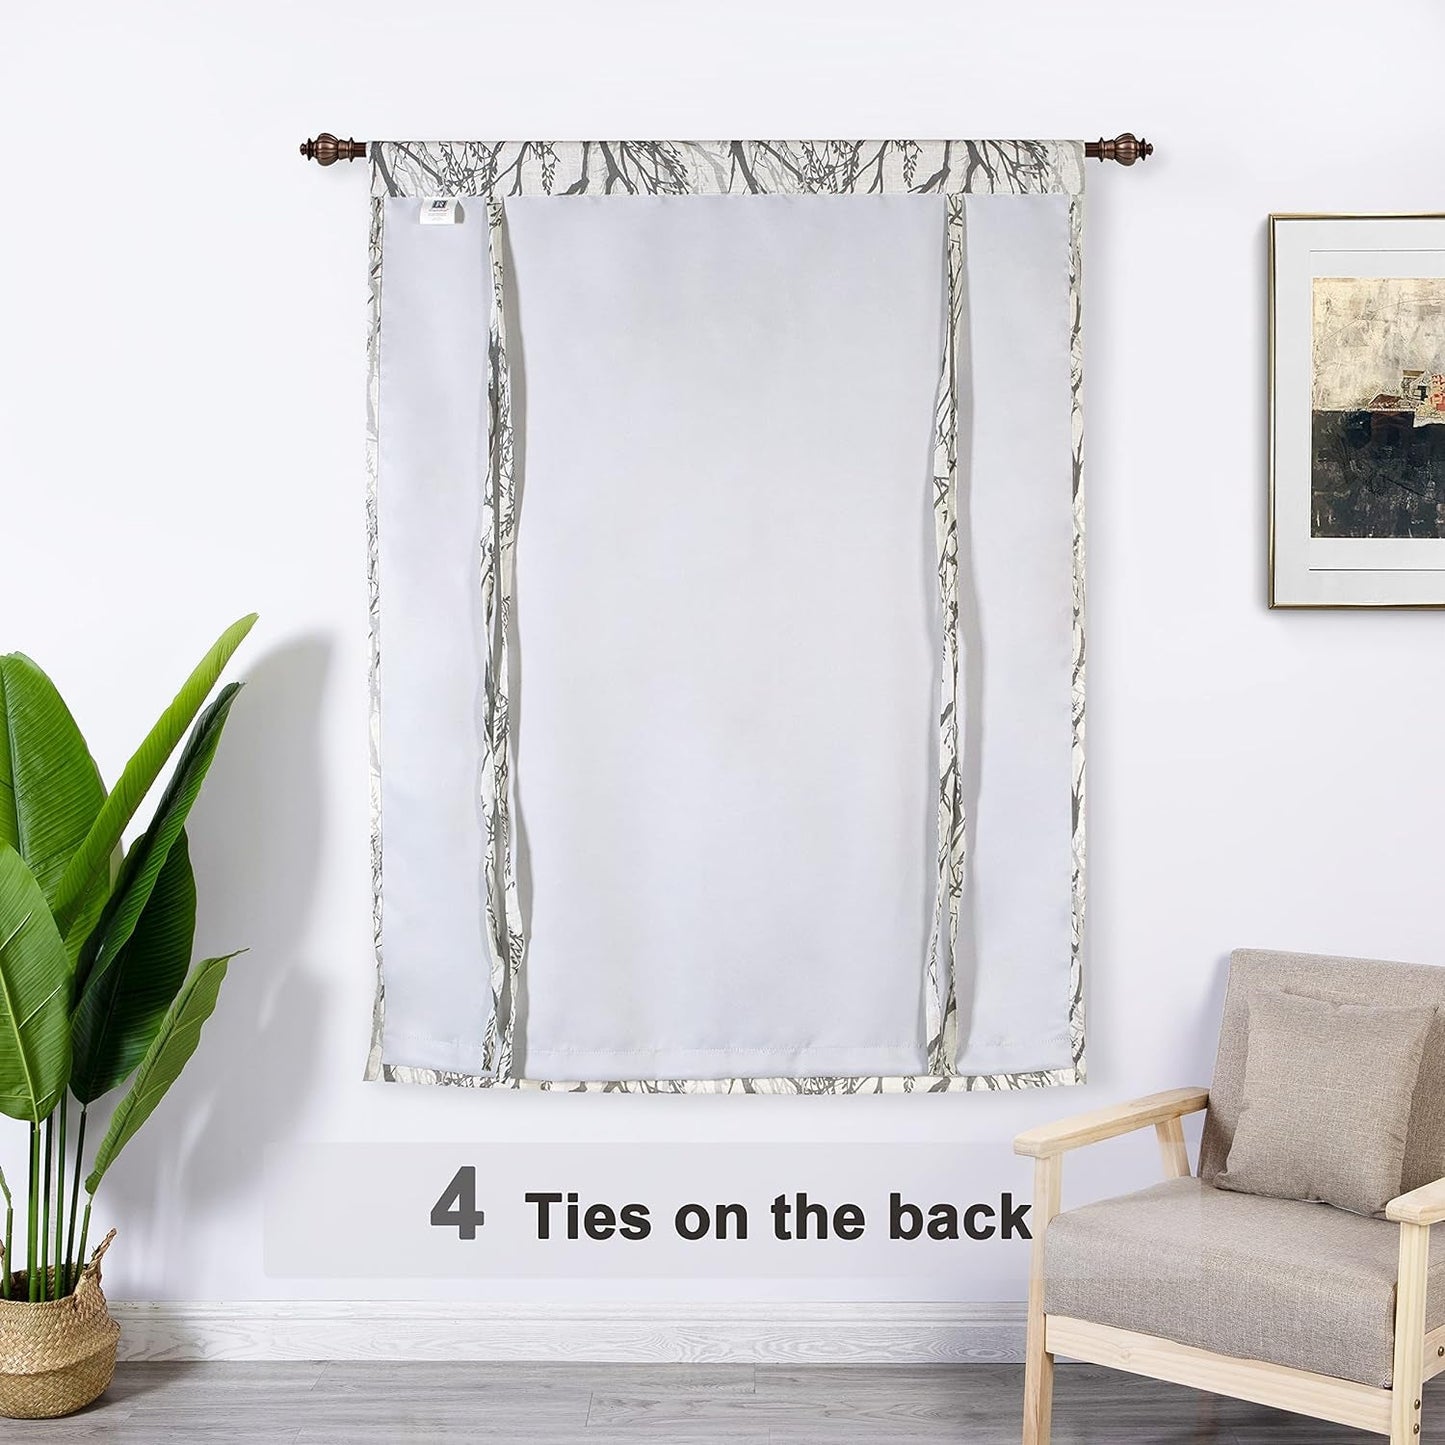 Driftaway Tree Branch Linen Blend Blackout Tie up Curtain for Kitchen Abstract Botanical Thermal Insulated Linen Curtains Tie up Shade for Bedroom Adjustable Balloon Rod Pocket 45 Inch by 63 Inch Gray